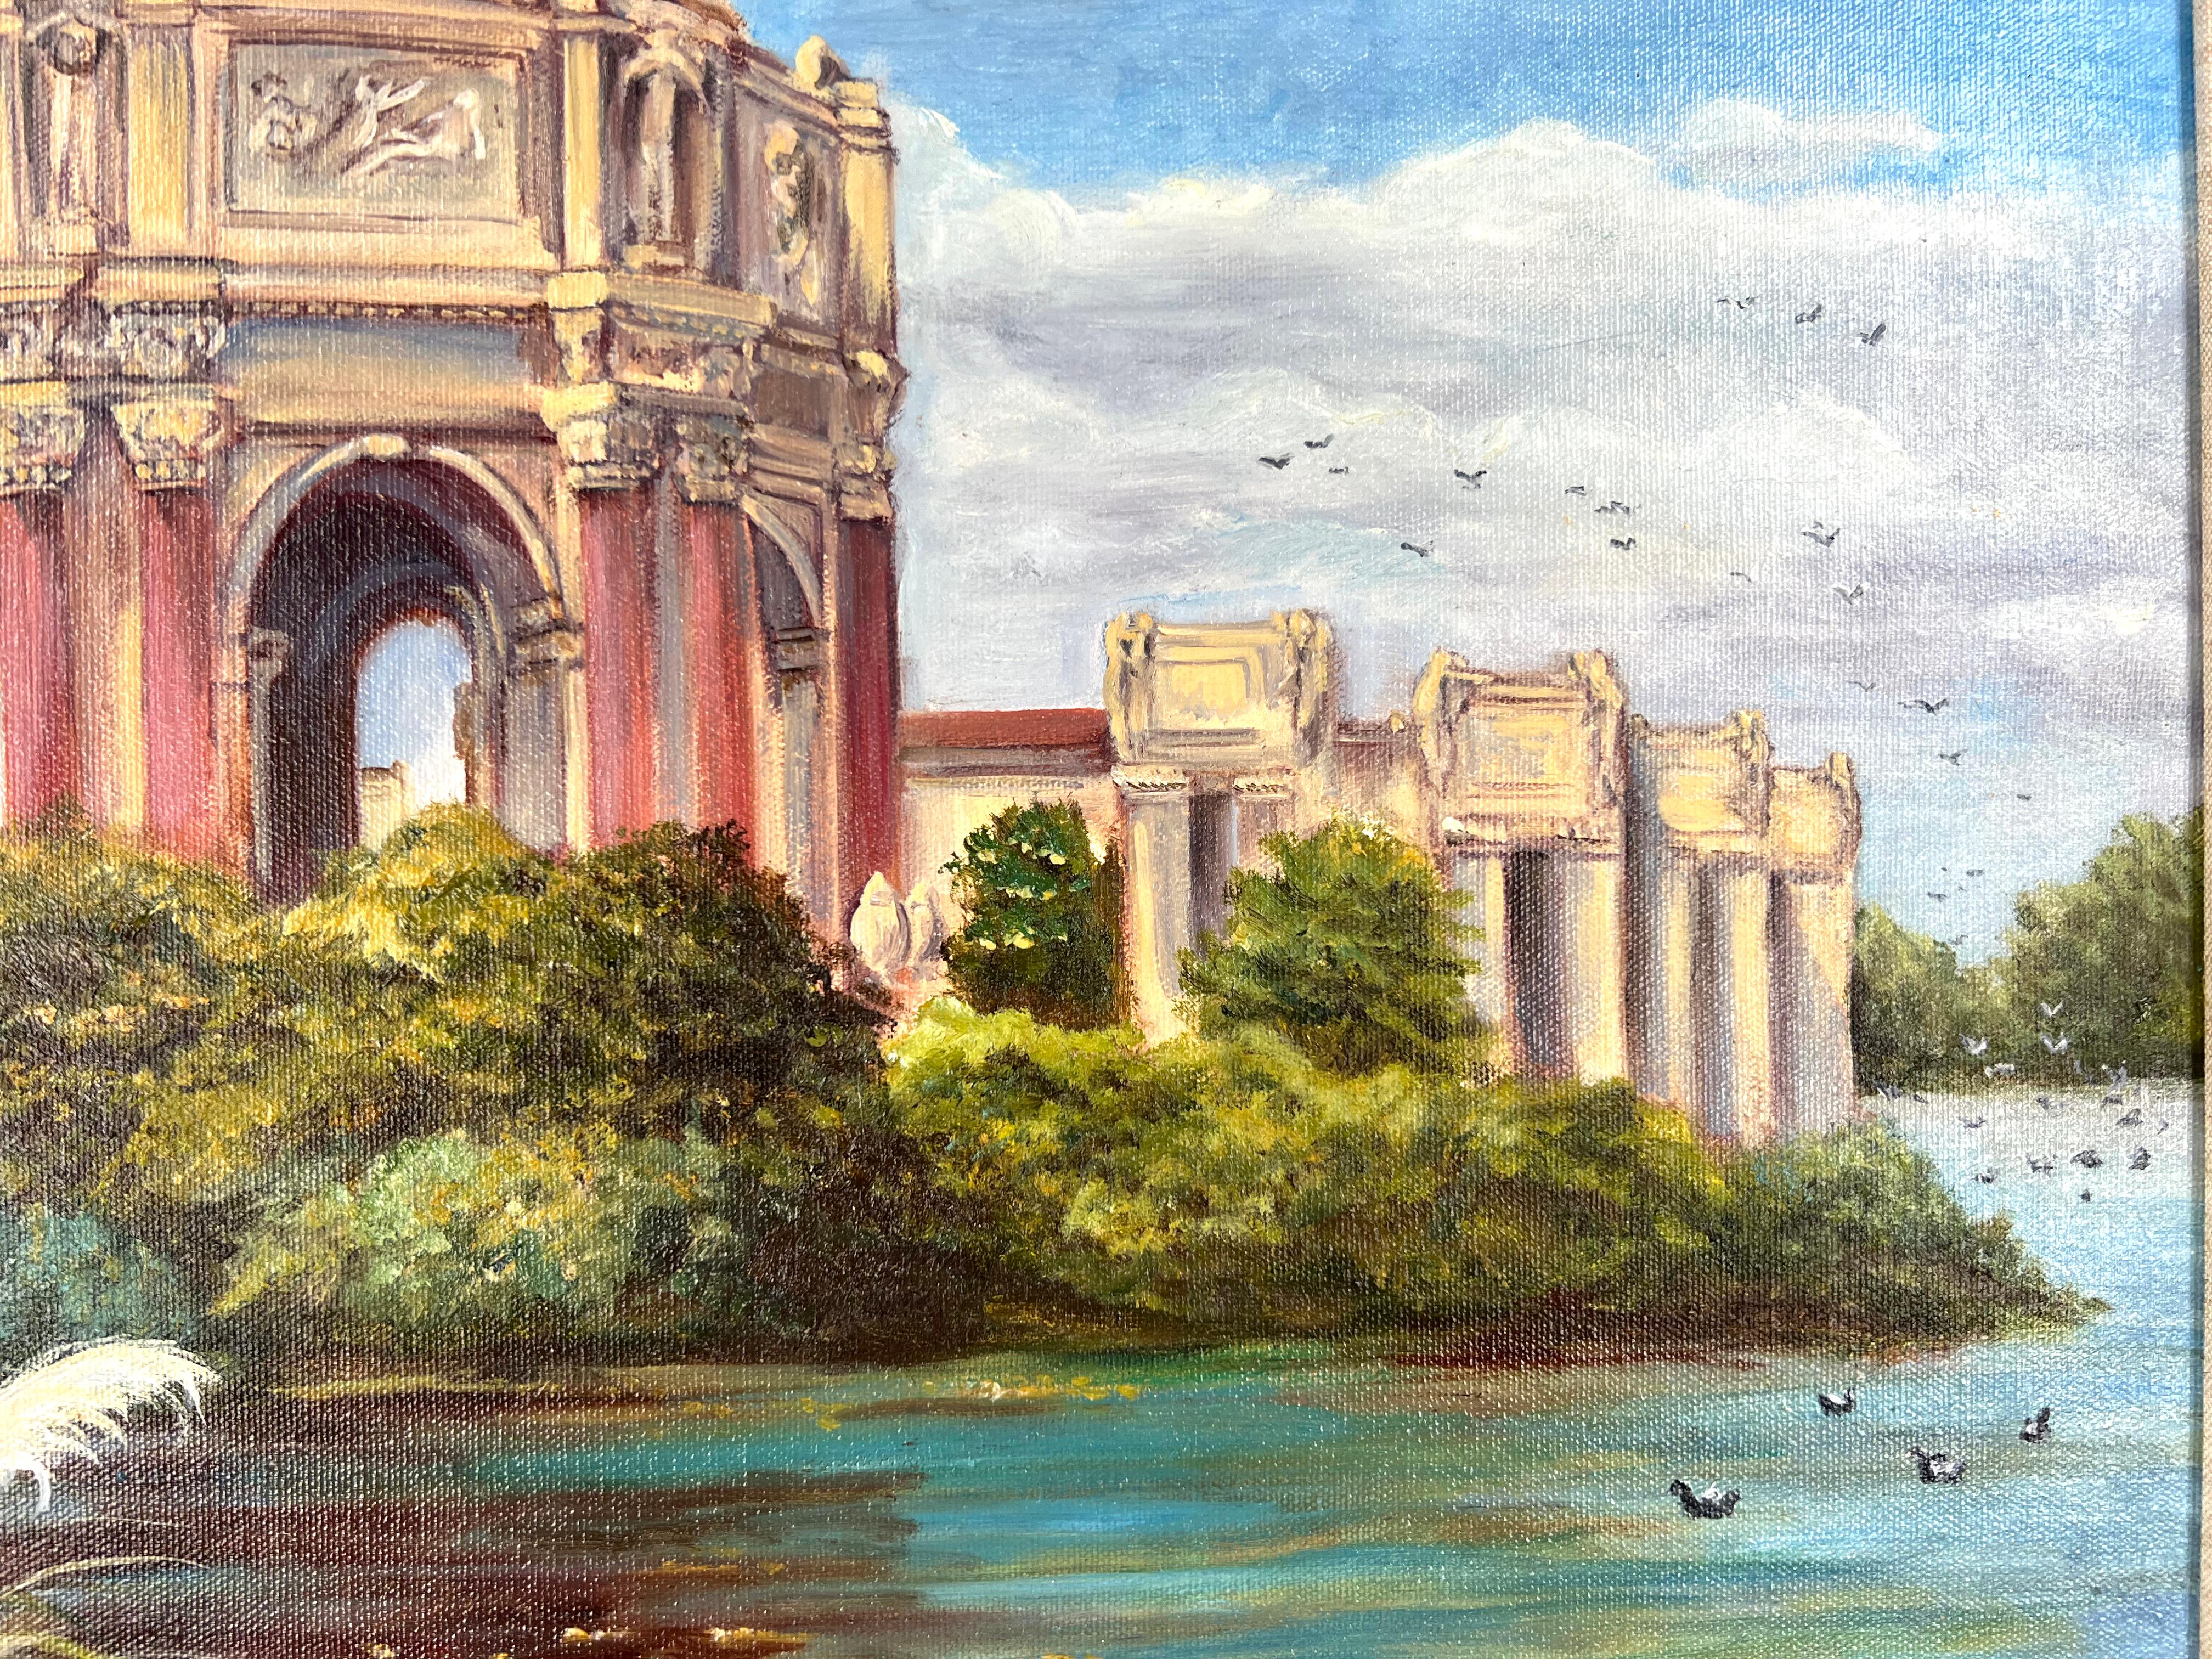 San Francisco Palace of Fine Arts Oil on Canvas
Palace of Fine Arts by San Francisco native Leonida Louise (Bertone) Ivanetich (American, b-1941), migratory birds fly over head an alight in the Marina watershed on a cool San Francisco evening.